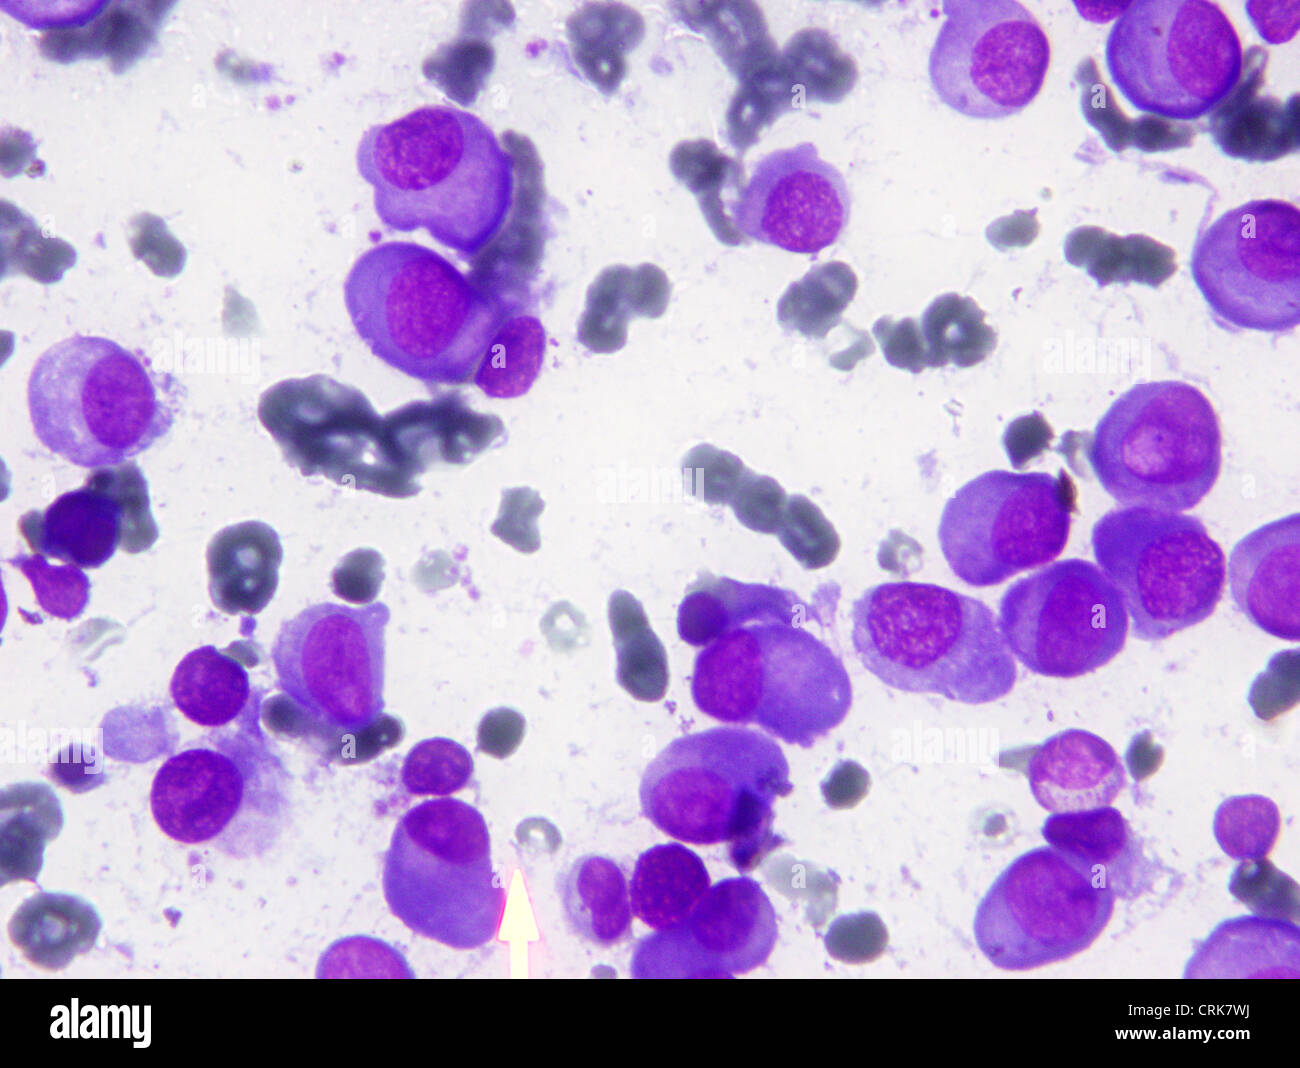 Cancer cells Stock Photo